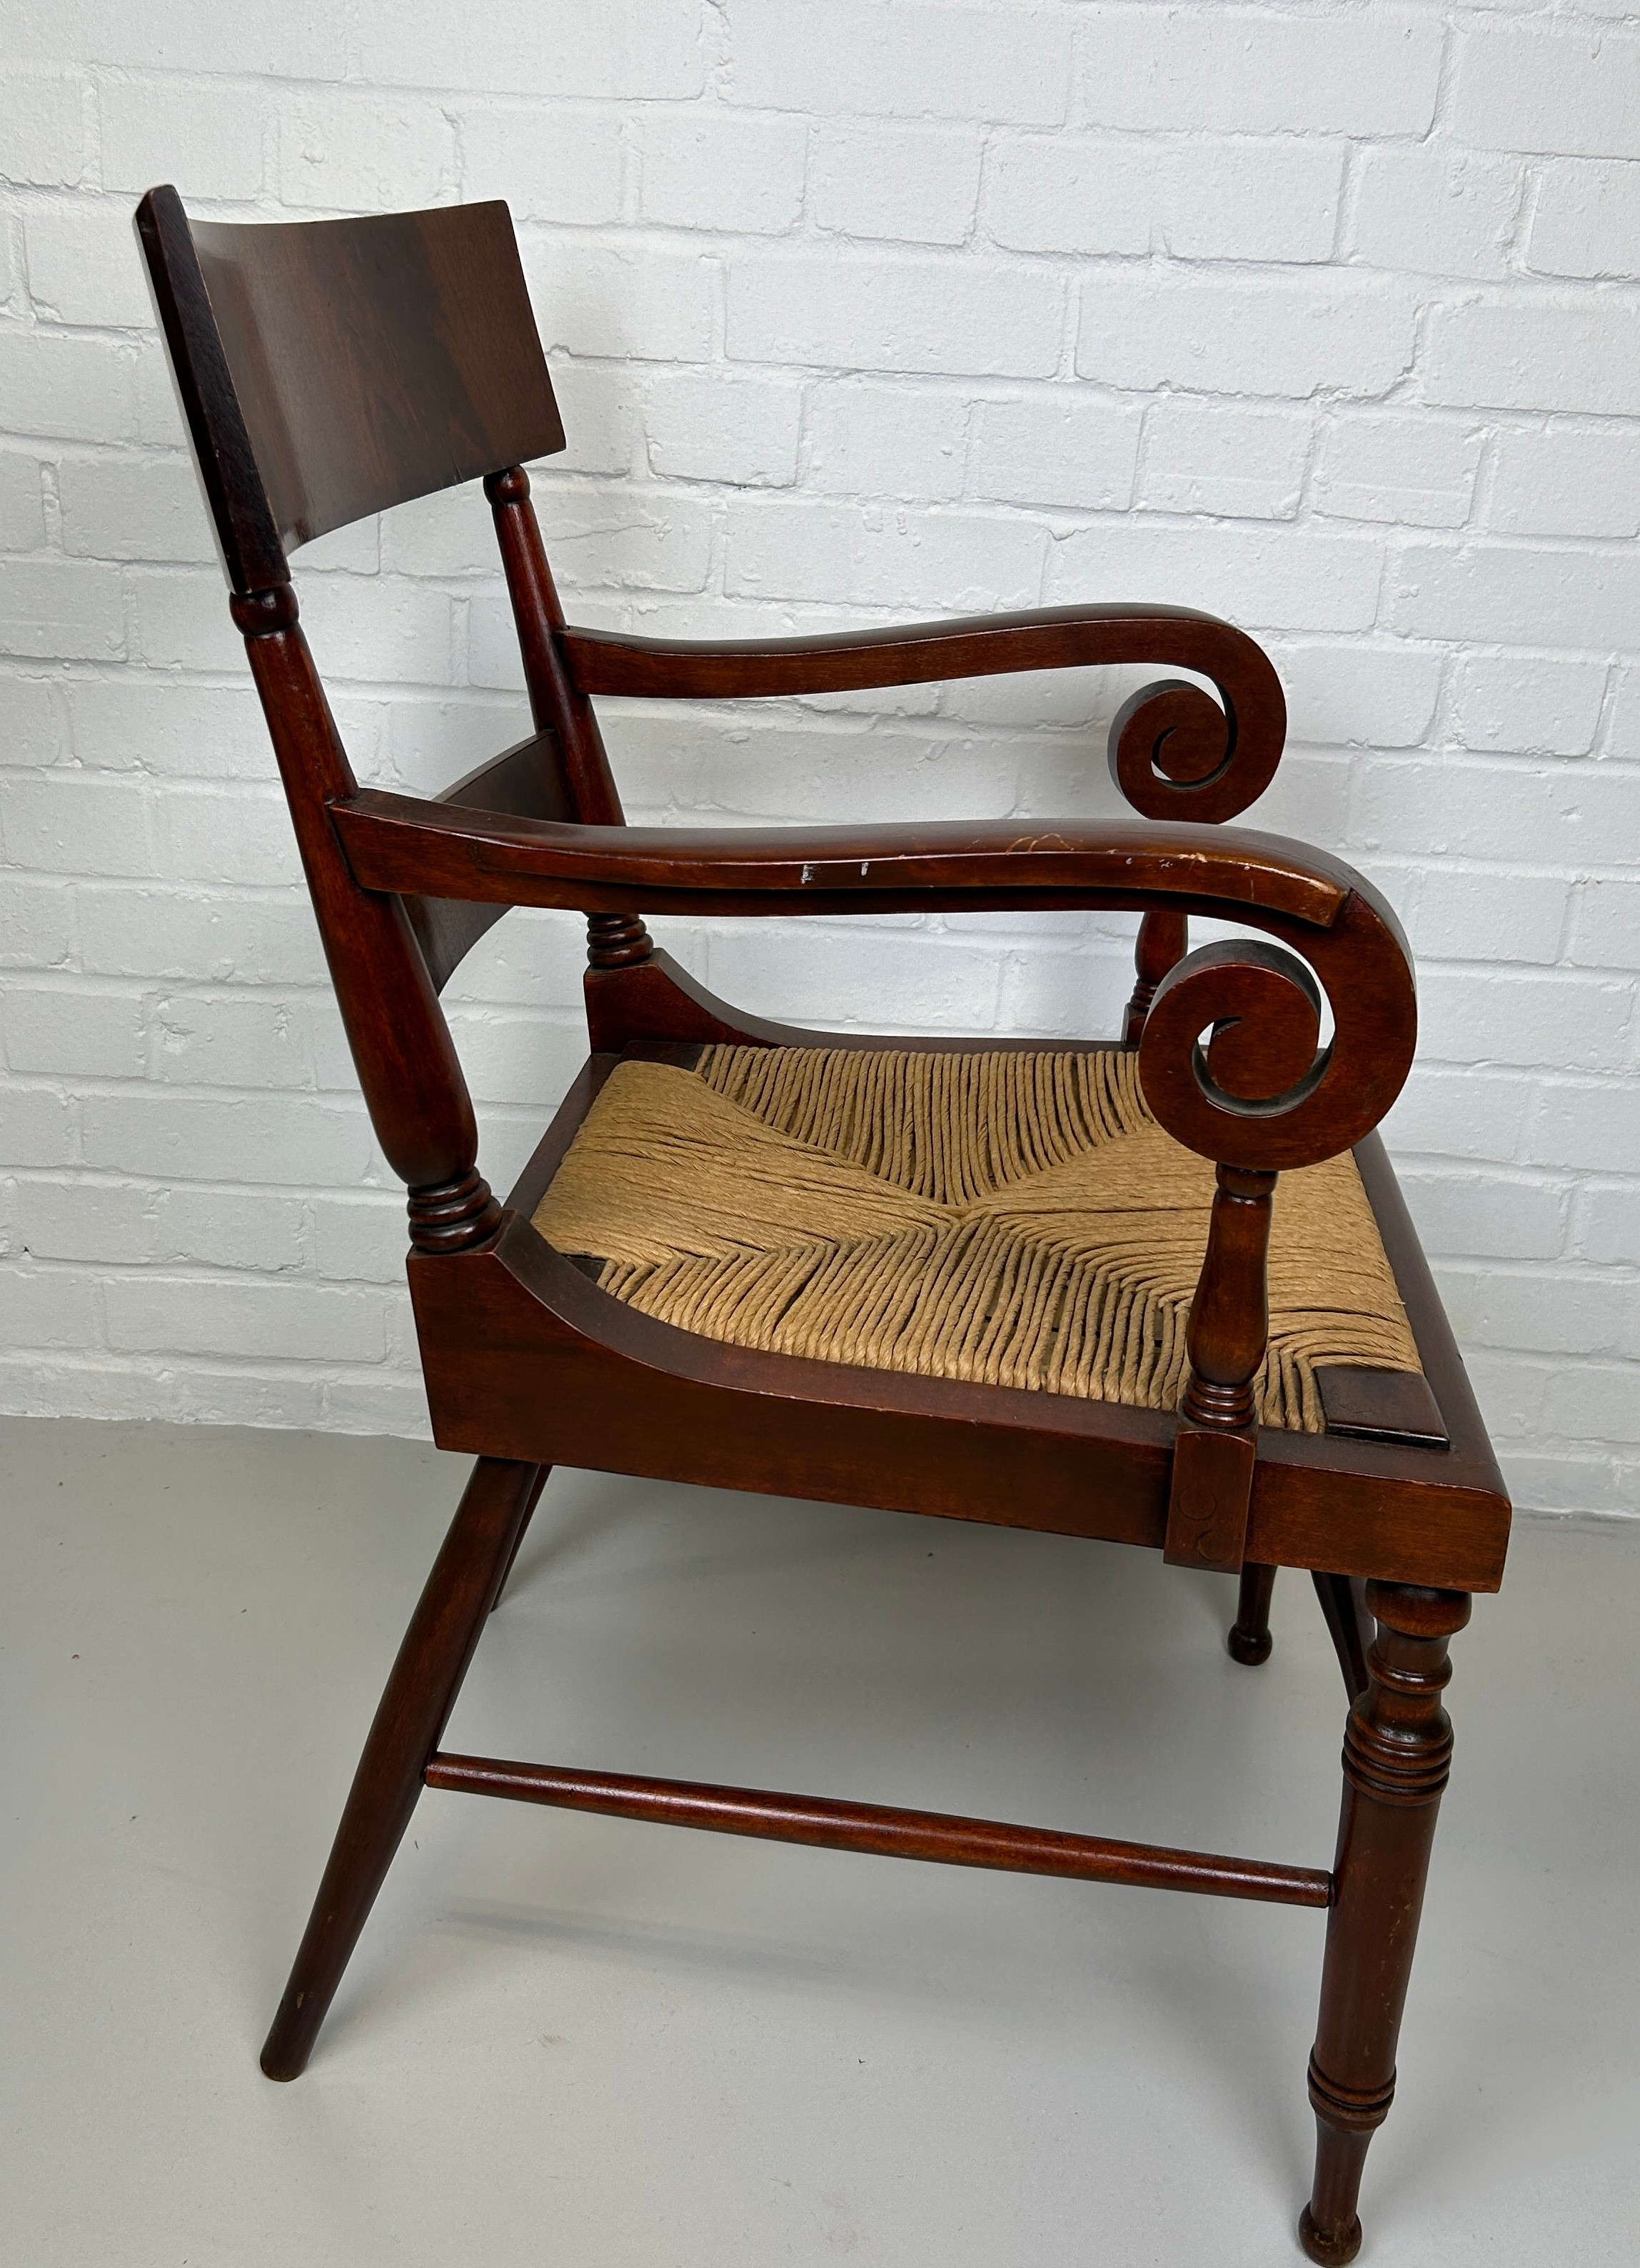 AN EARLY 20TH CENTURY ARMCHAIR OR DESK CHAIR, Flame mahogany with scroll arms and cane upholstered - Image 2 of 4